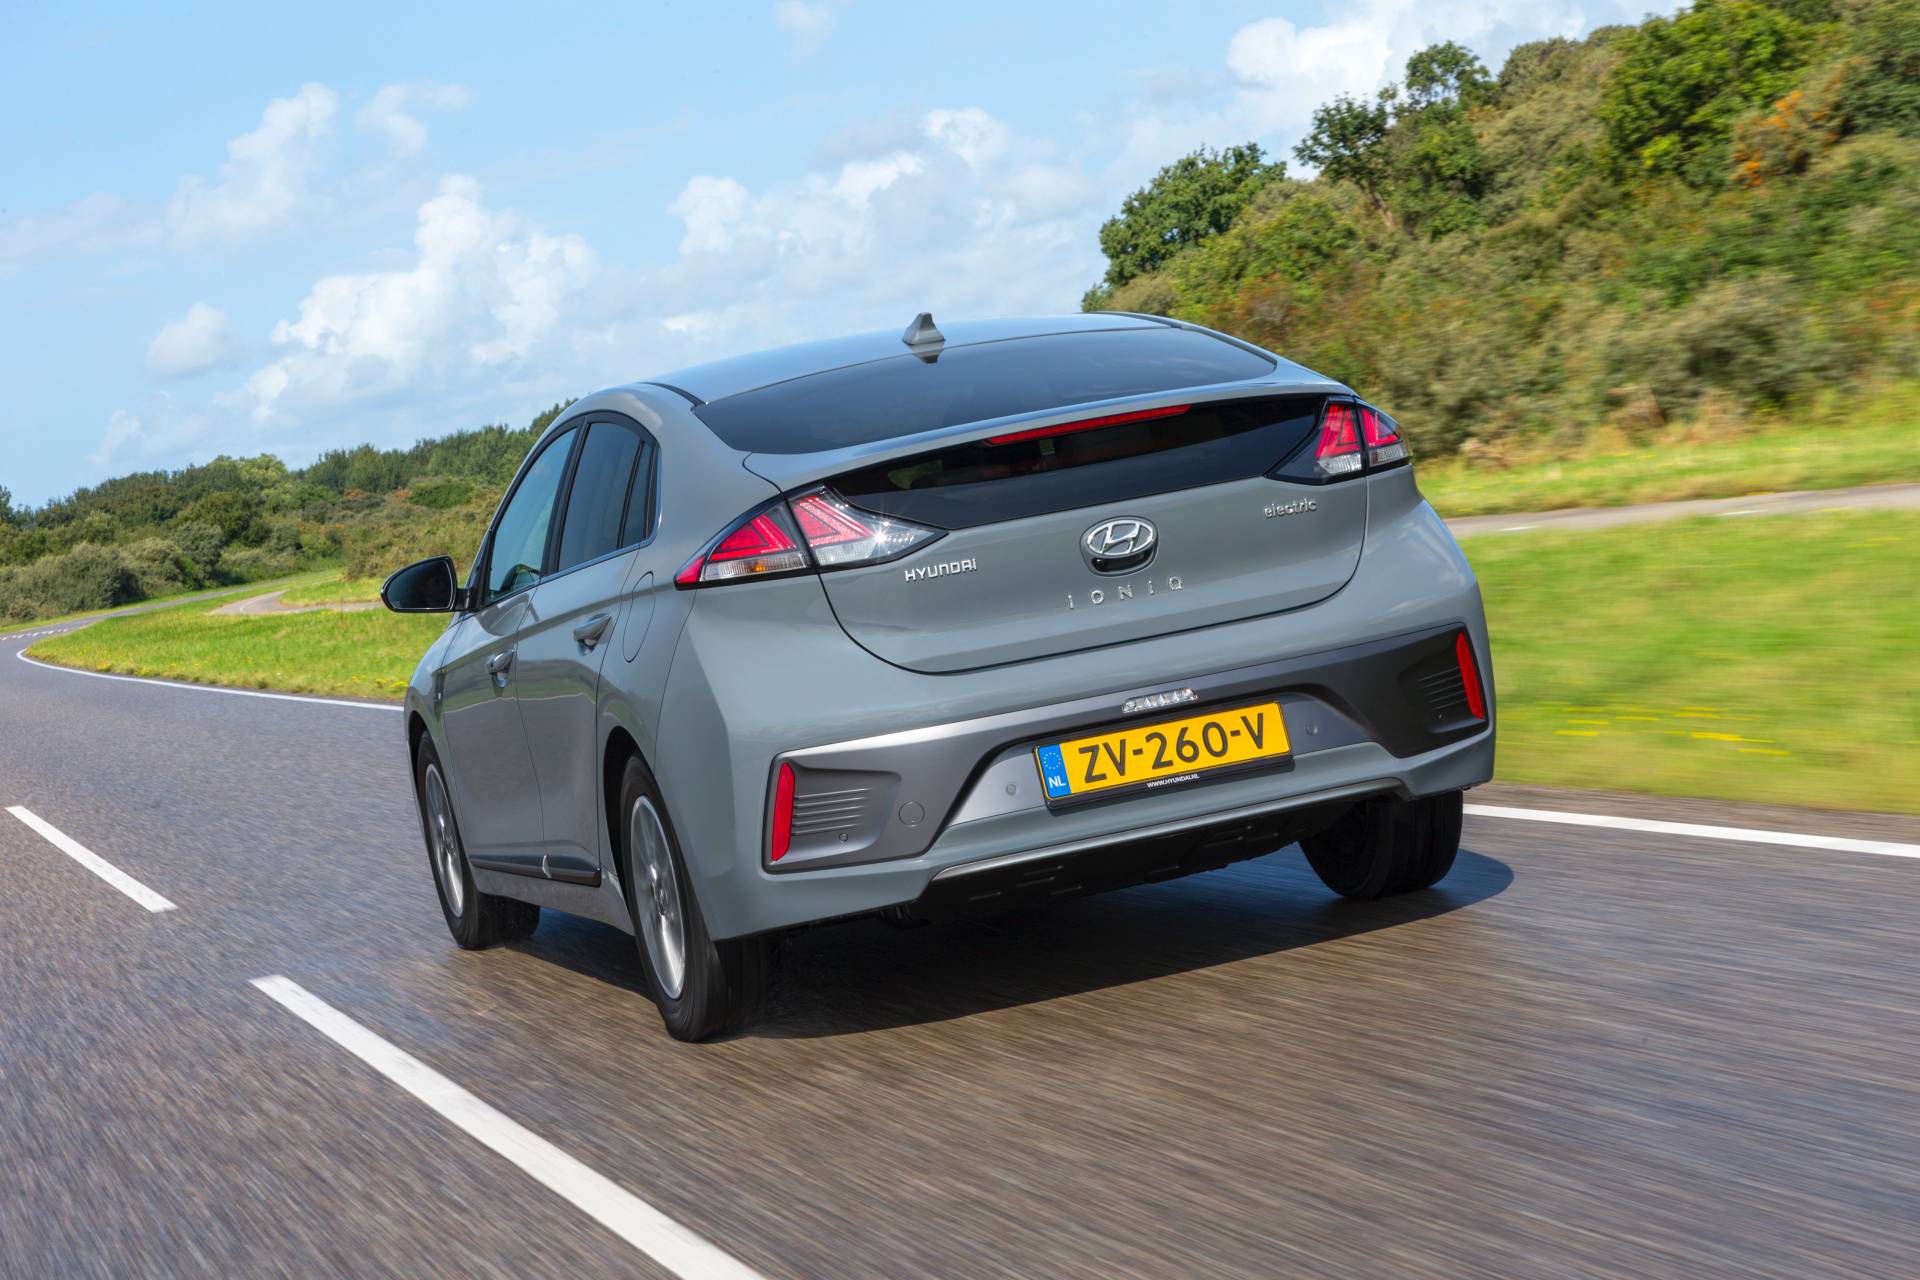 Facelifted 2020 Hyundai Ioniq Electric: Final Specs And New Photos Released